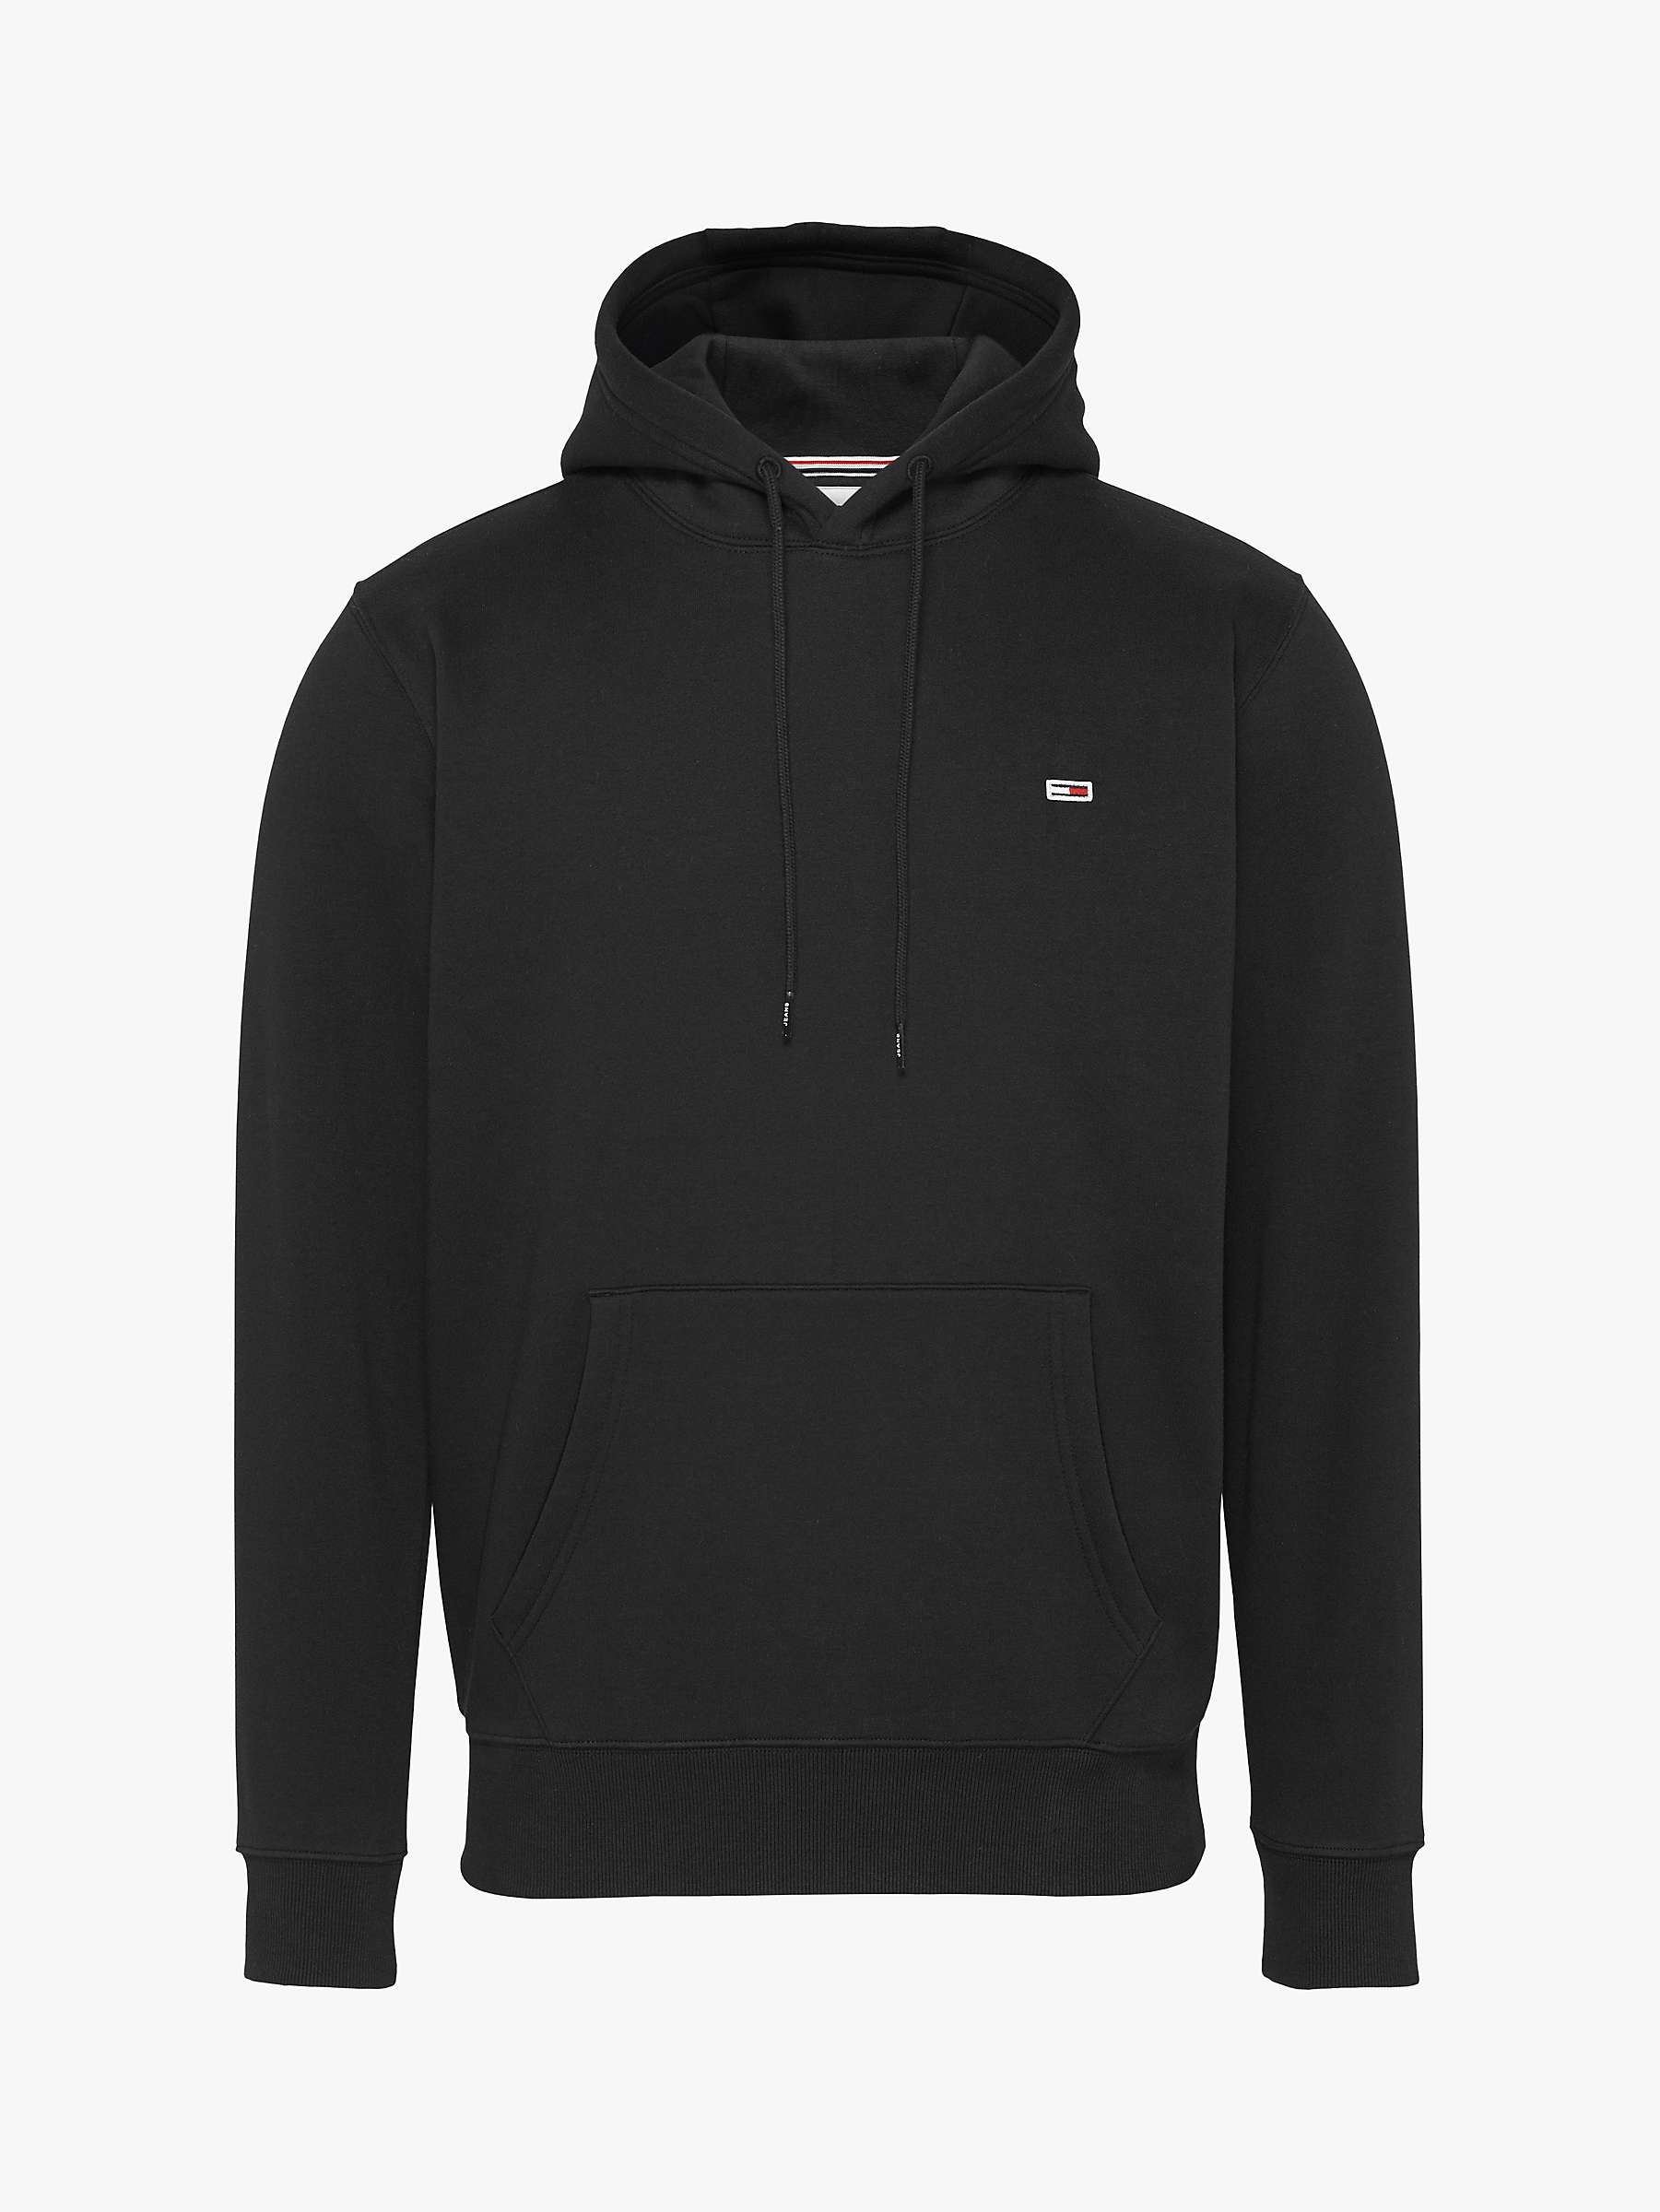 Tommy Jeans Men's & Women's Stock Available